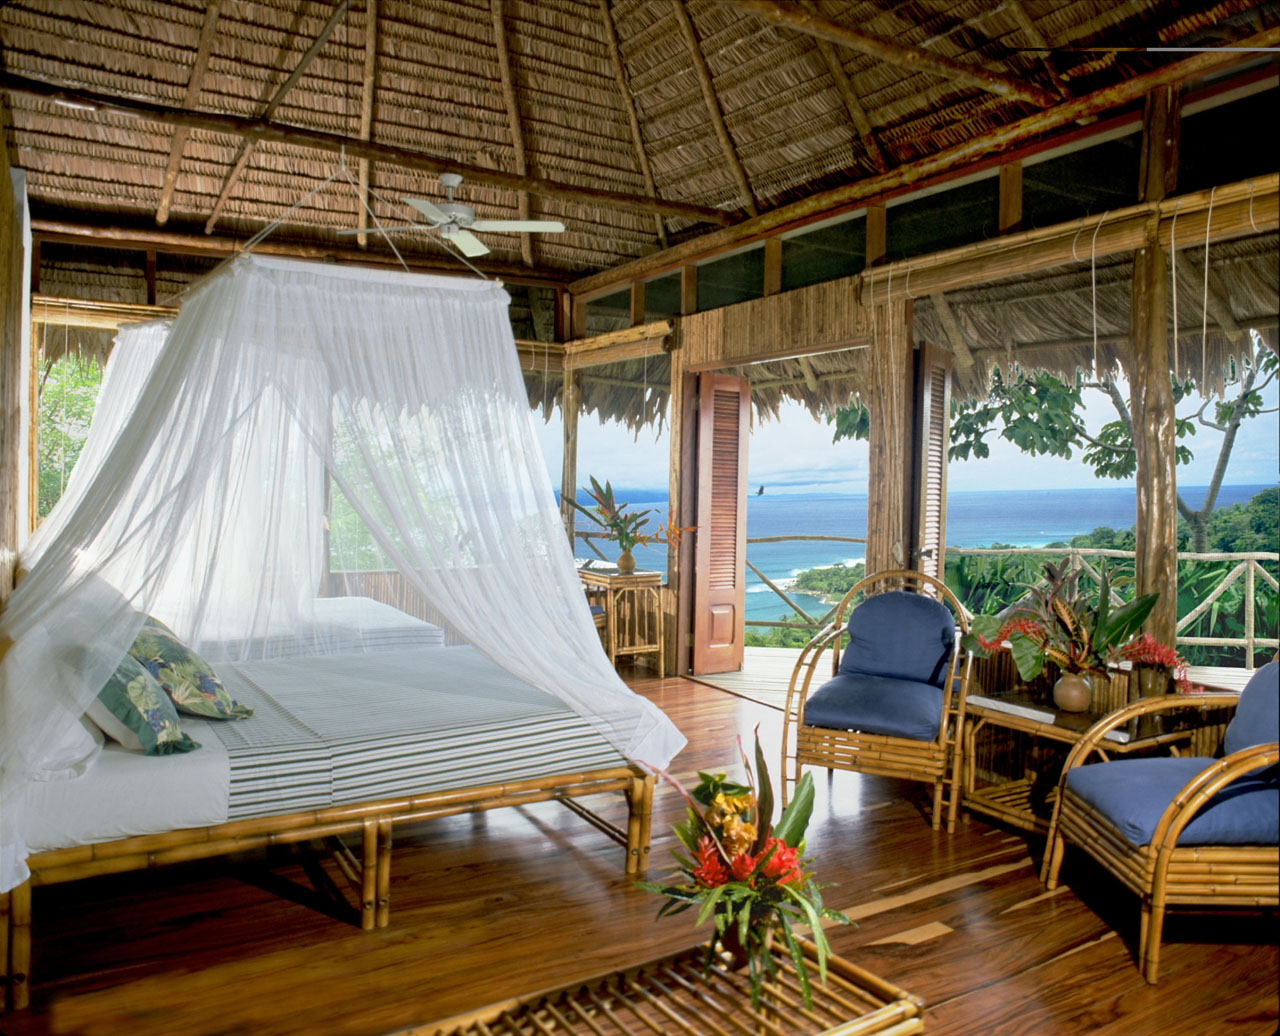 Private guest bungalow of the Lapa Rios Rainforest Ecolodge in Costa Rica